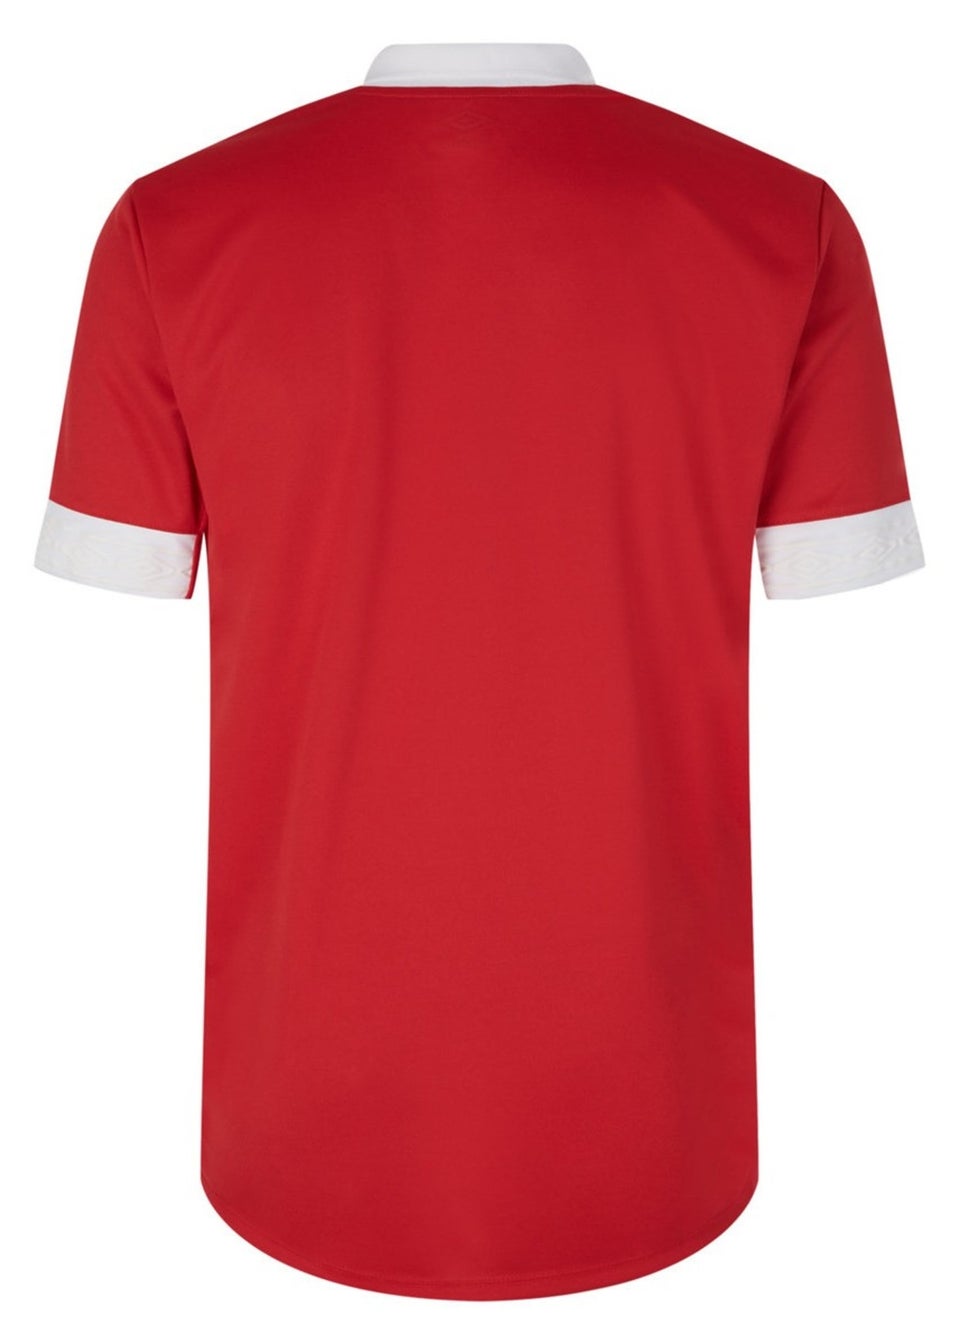 Umbro Red Tempest Jersey